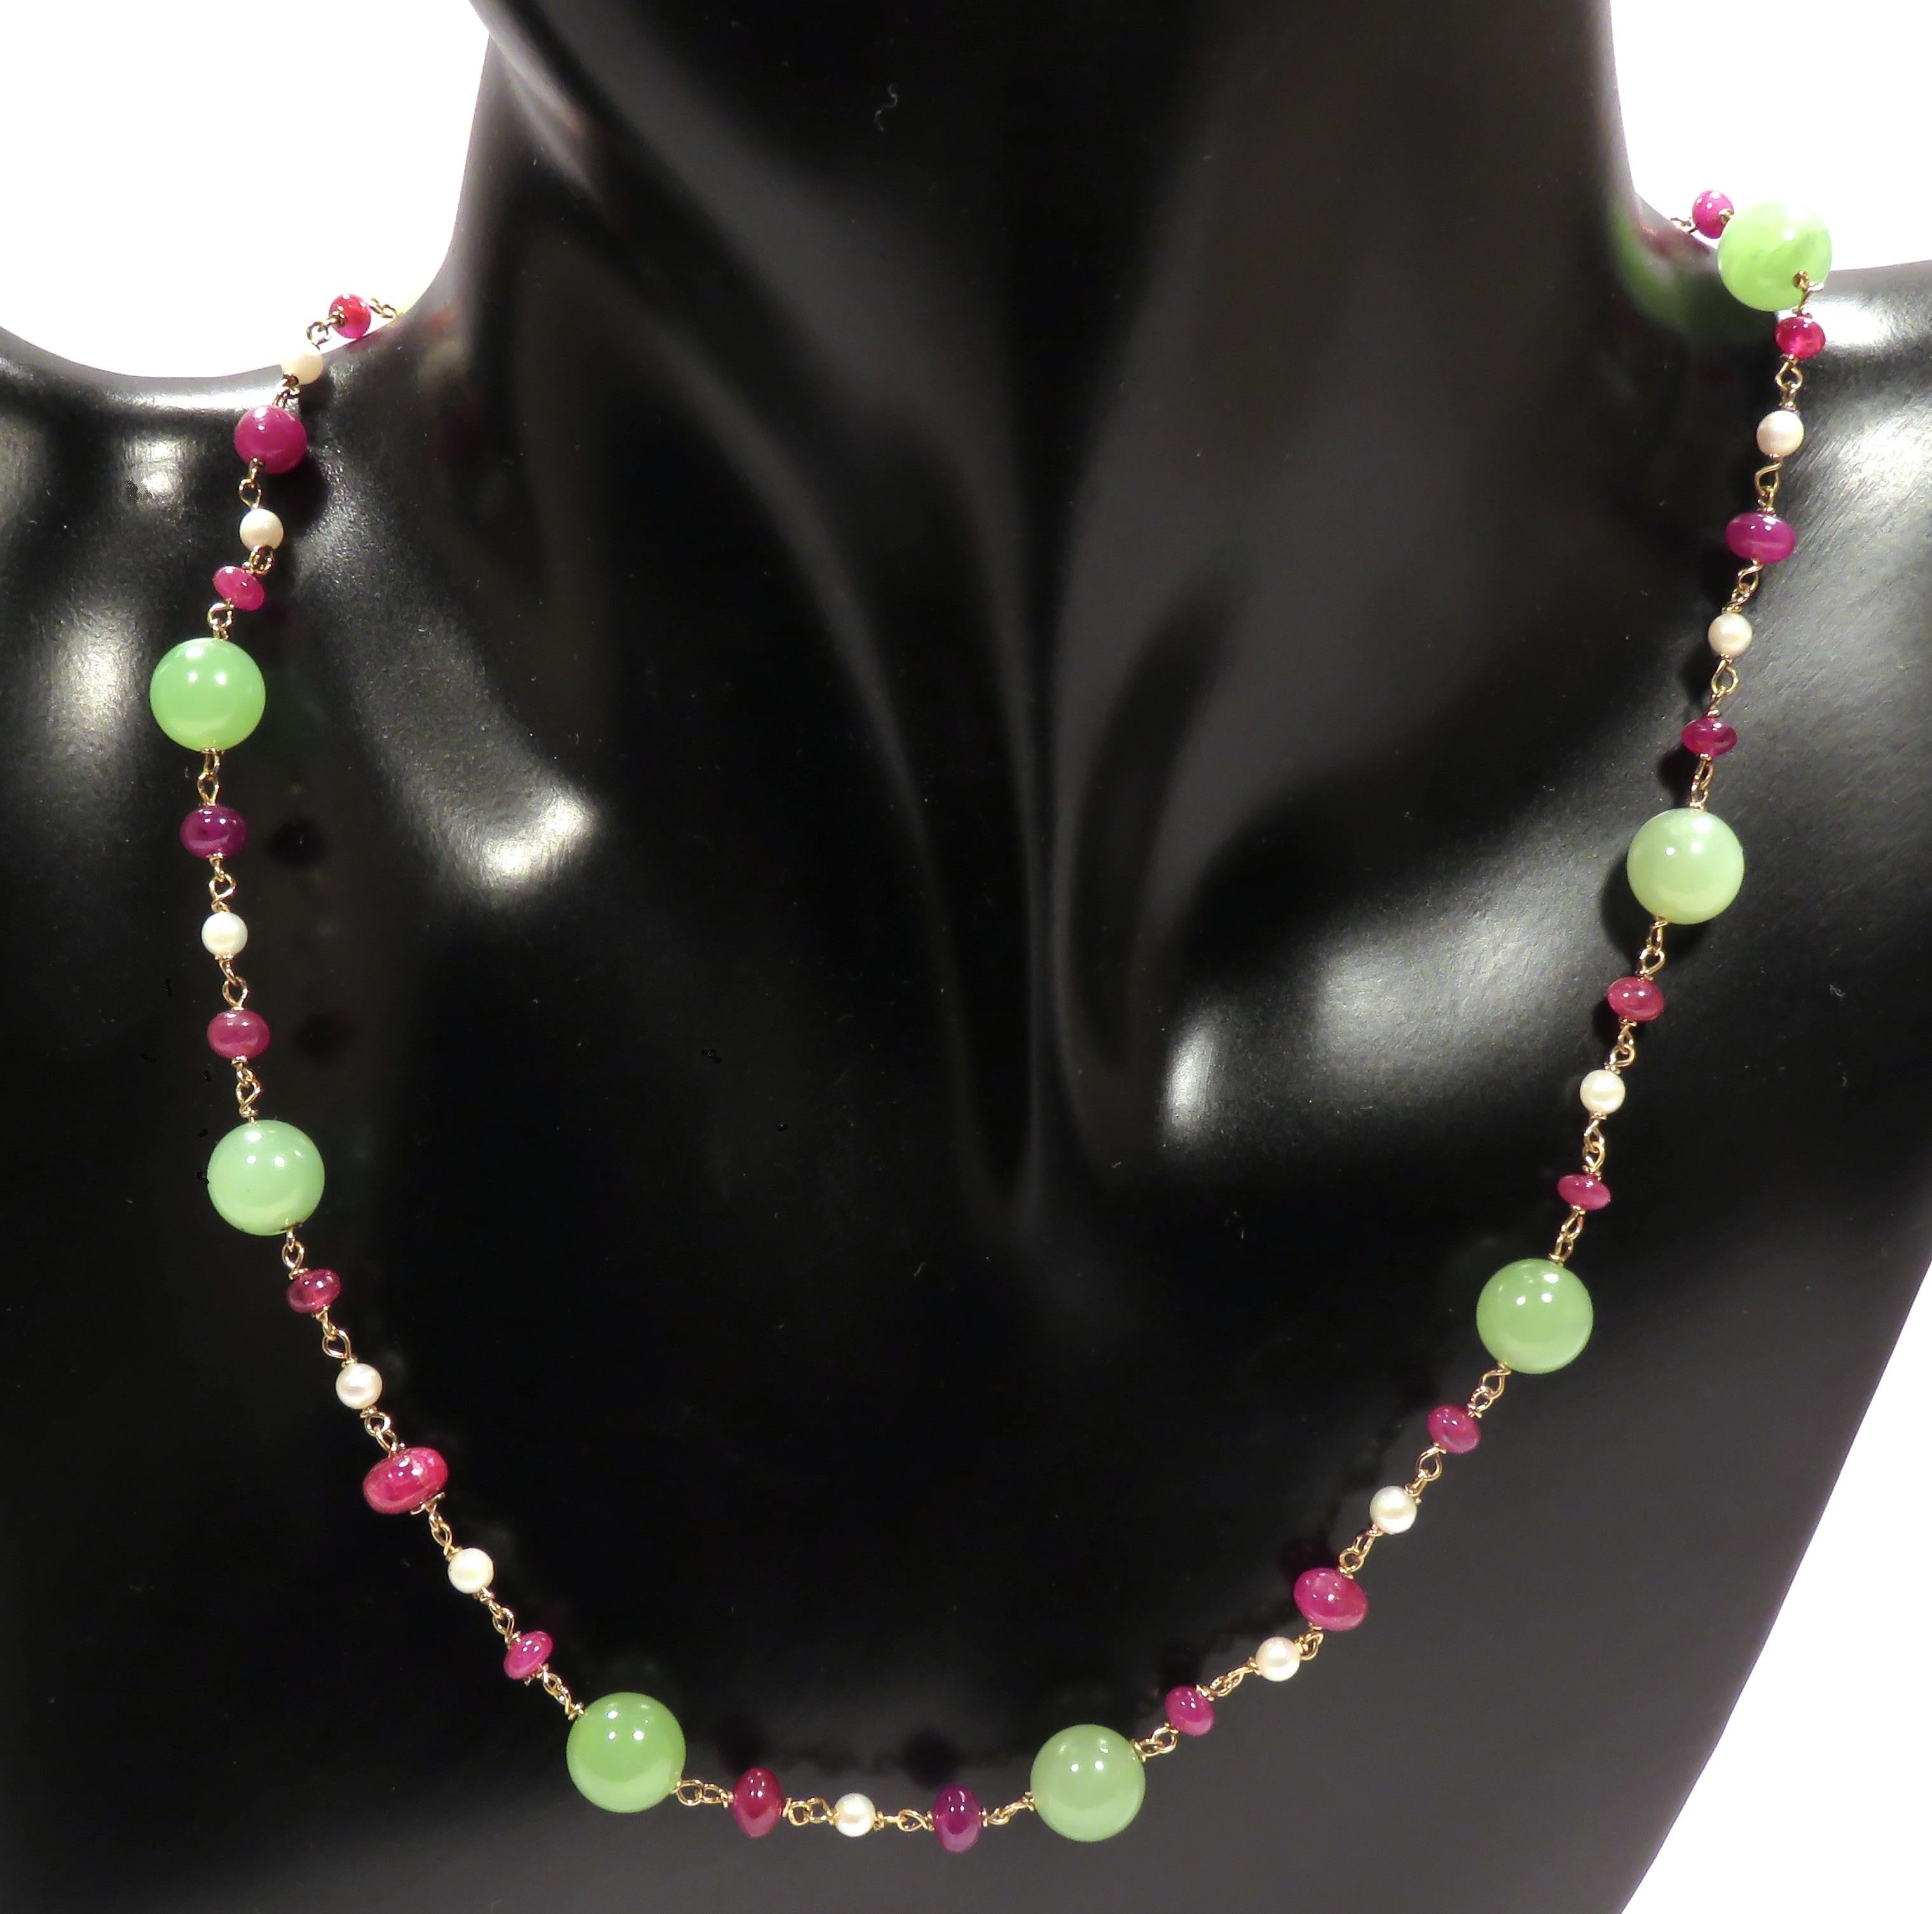 Attractive choker necklace crafted in 9 karat rose gold with green jade, white freshwater pearls and rubies. The length of the necklace is adjustable from 390 mm to 420 mm / from 15.354 inches to 16.535 inches, it is possible to lengthen the choker